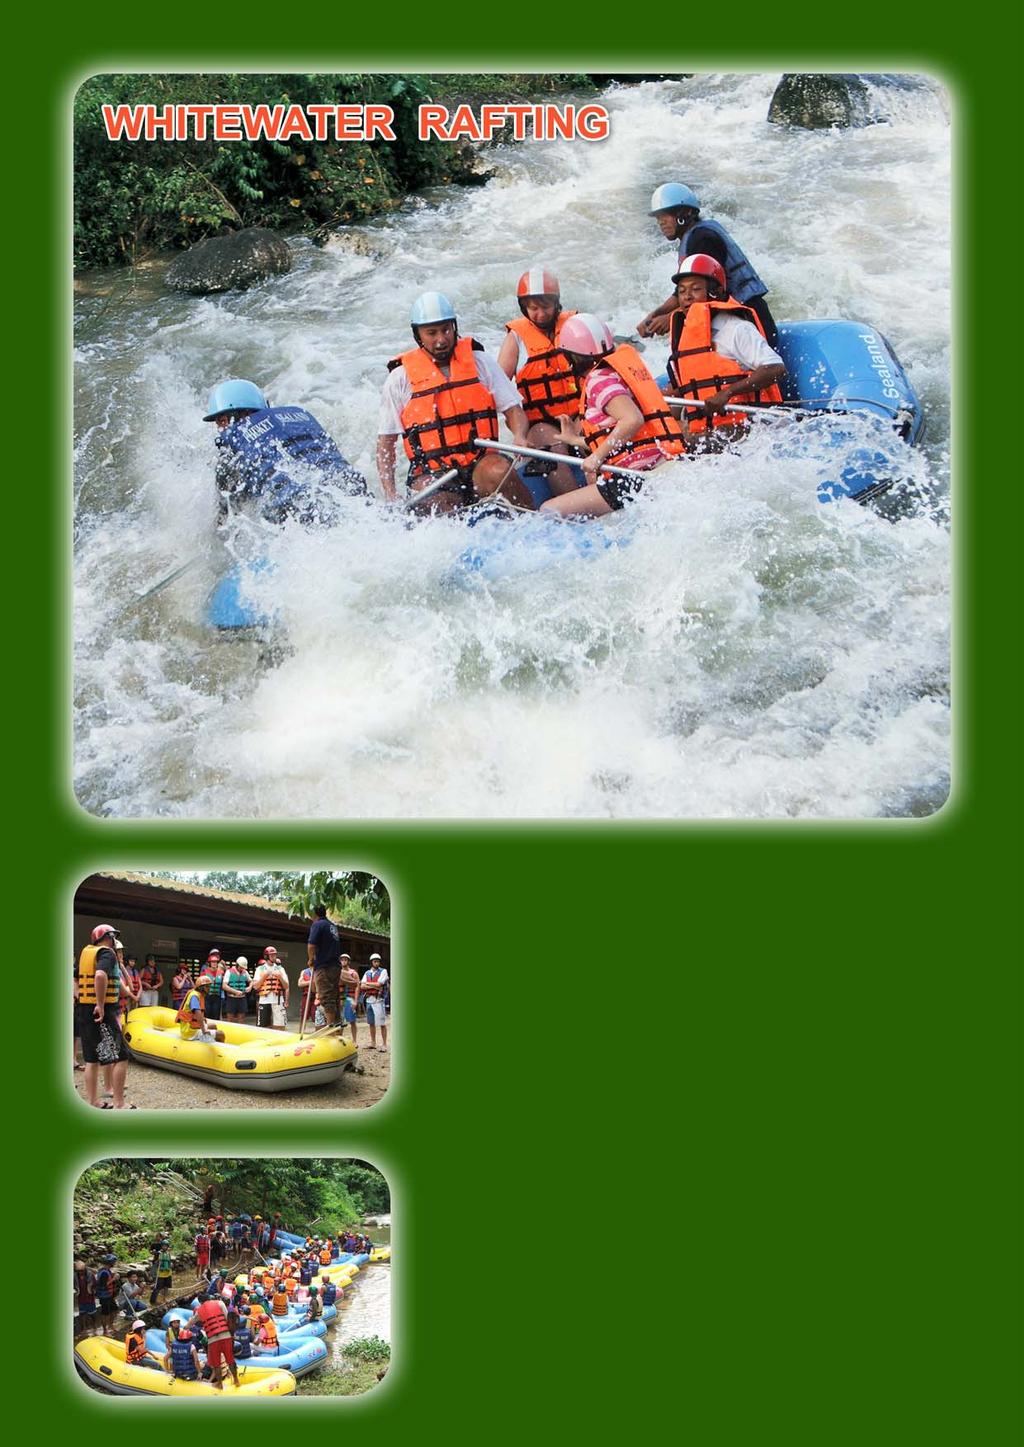 Whitewater Rafting Tour Code (SLC 01) The most favorite and well-known activity which we are the pioneer, offers the excitement on inflatable raft controlled by experienced paddle guide over 4